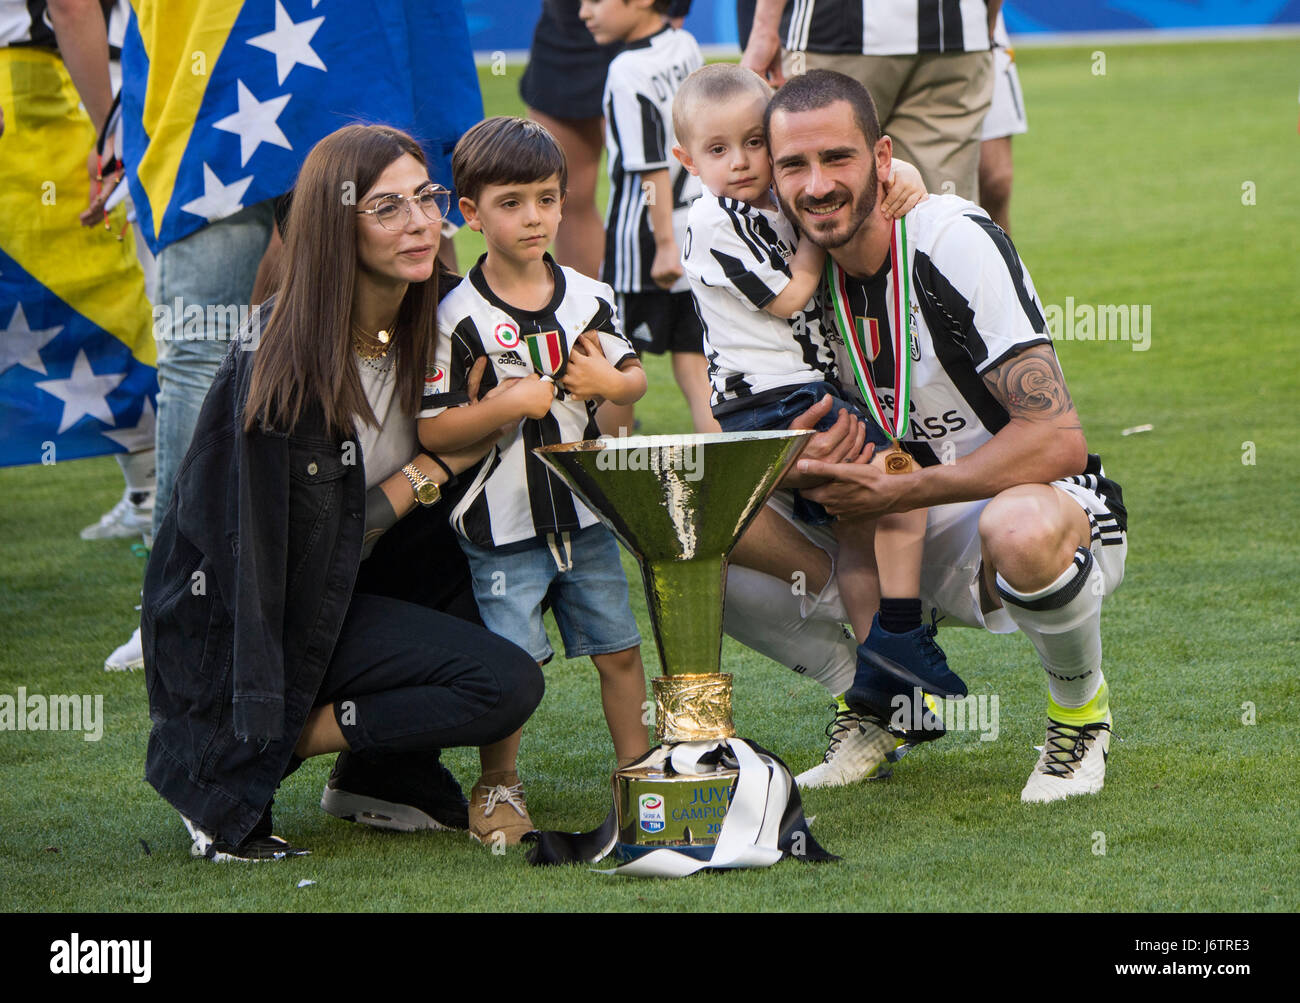 Turin, Italy. 21st May, 2017. Leonardo Bonucci (Juventus) Football/Soccer : Leonardo Bonucci of Juventus celebrates their sixth straight league title with his wife Martina Maccari, sons Lorenzo and Matteo and the trophy after the Italian 'Serie A' match between Juventus 3-0 FC Crotone at Juventus Stadium in Turin, Italy . Credit: Maurizio Borsari/AFLO/Alamy Live News Stock Photo